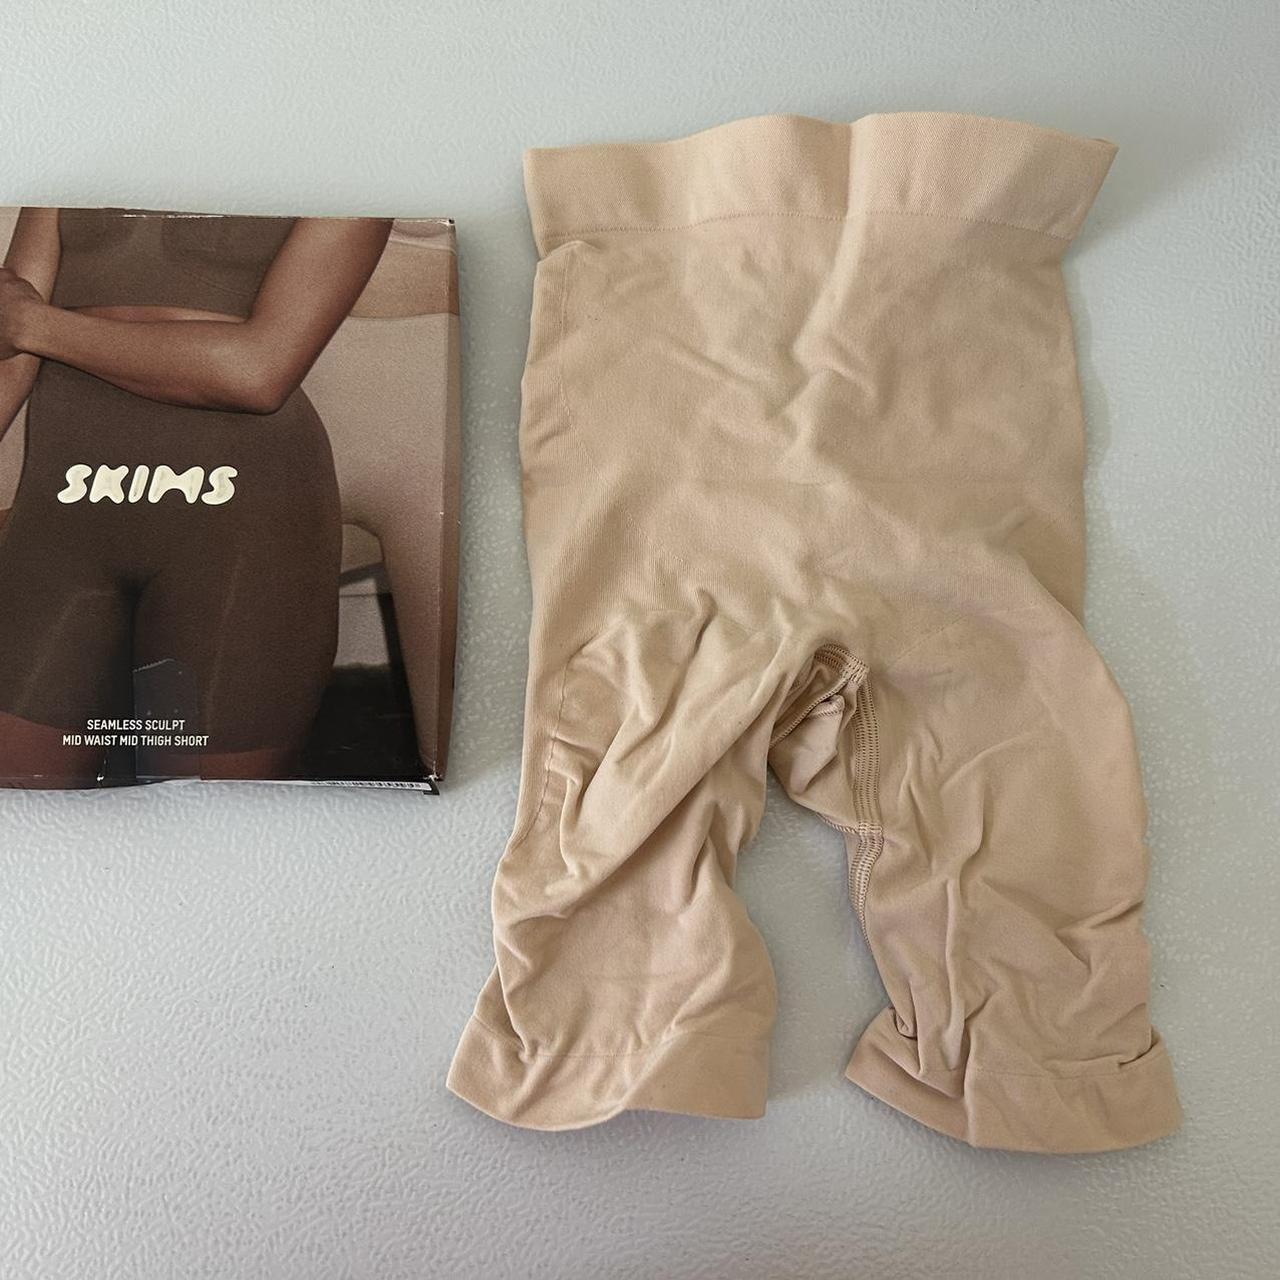 Skims Sculpting mid thigh short. New in box. Size: - Depop